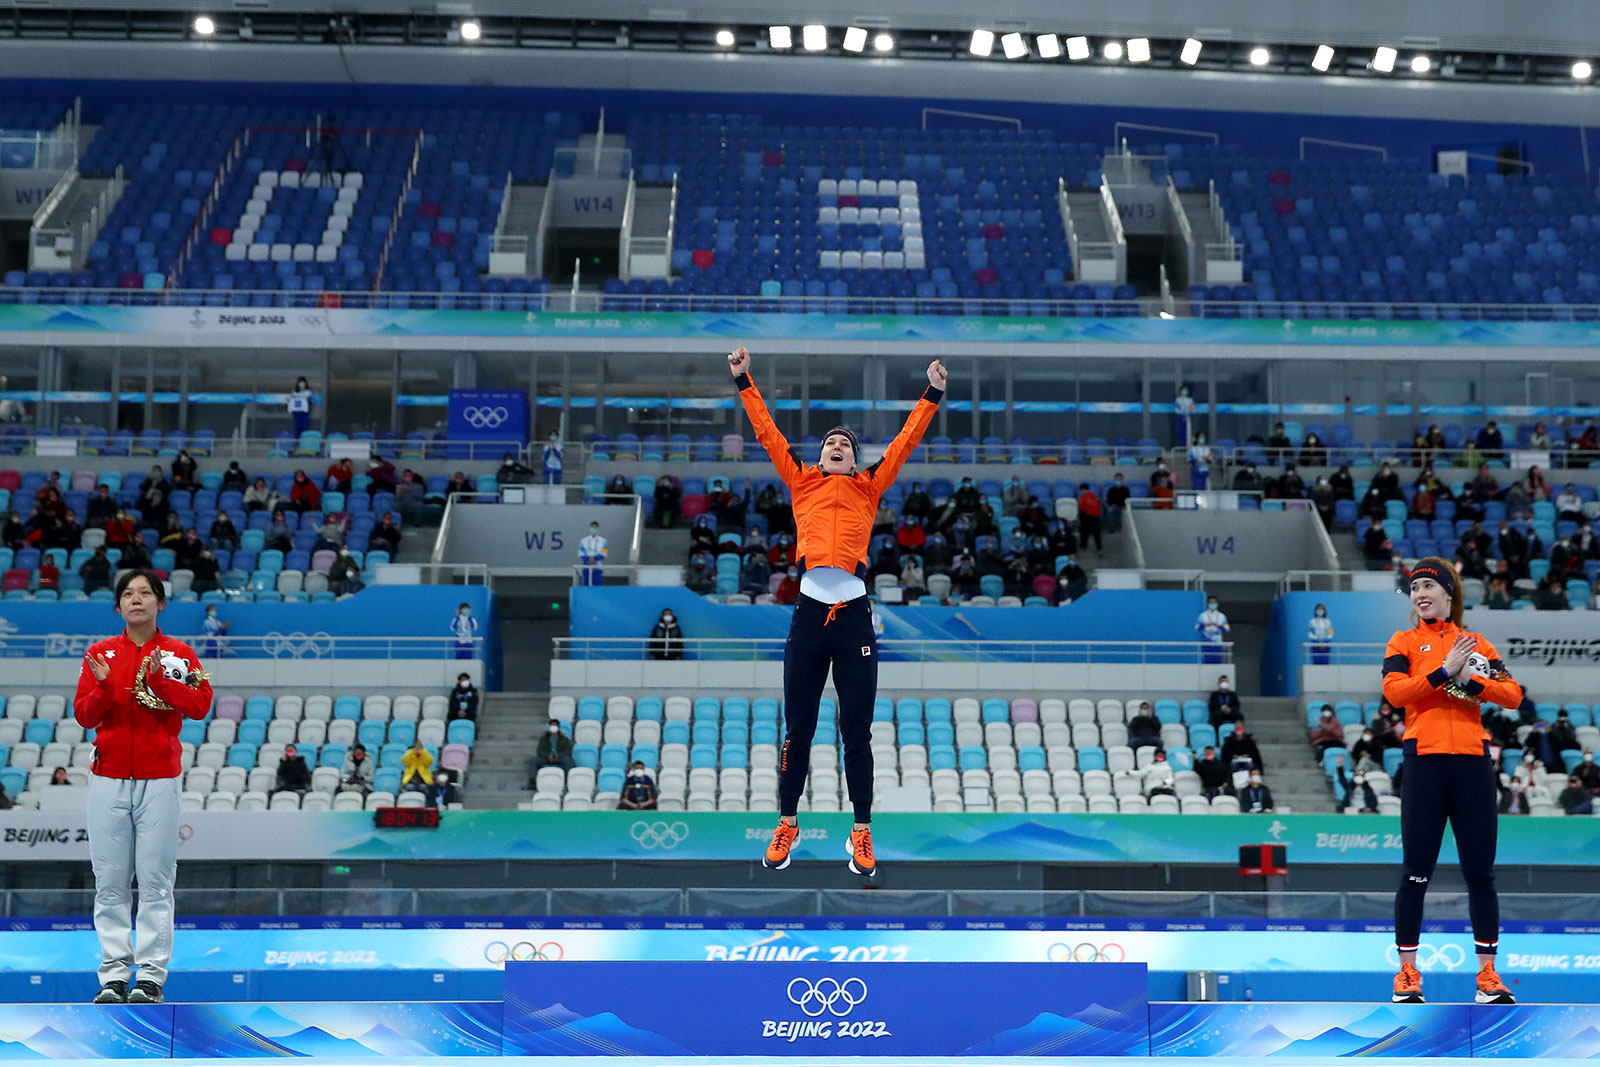 Dutch speed skater Ireen Wüst, center, celebrates on the podium following her win in the women's 1,500m on February 7.